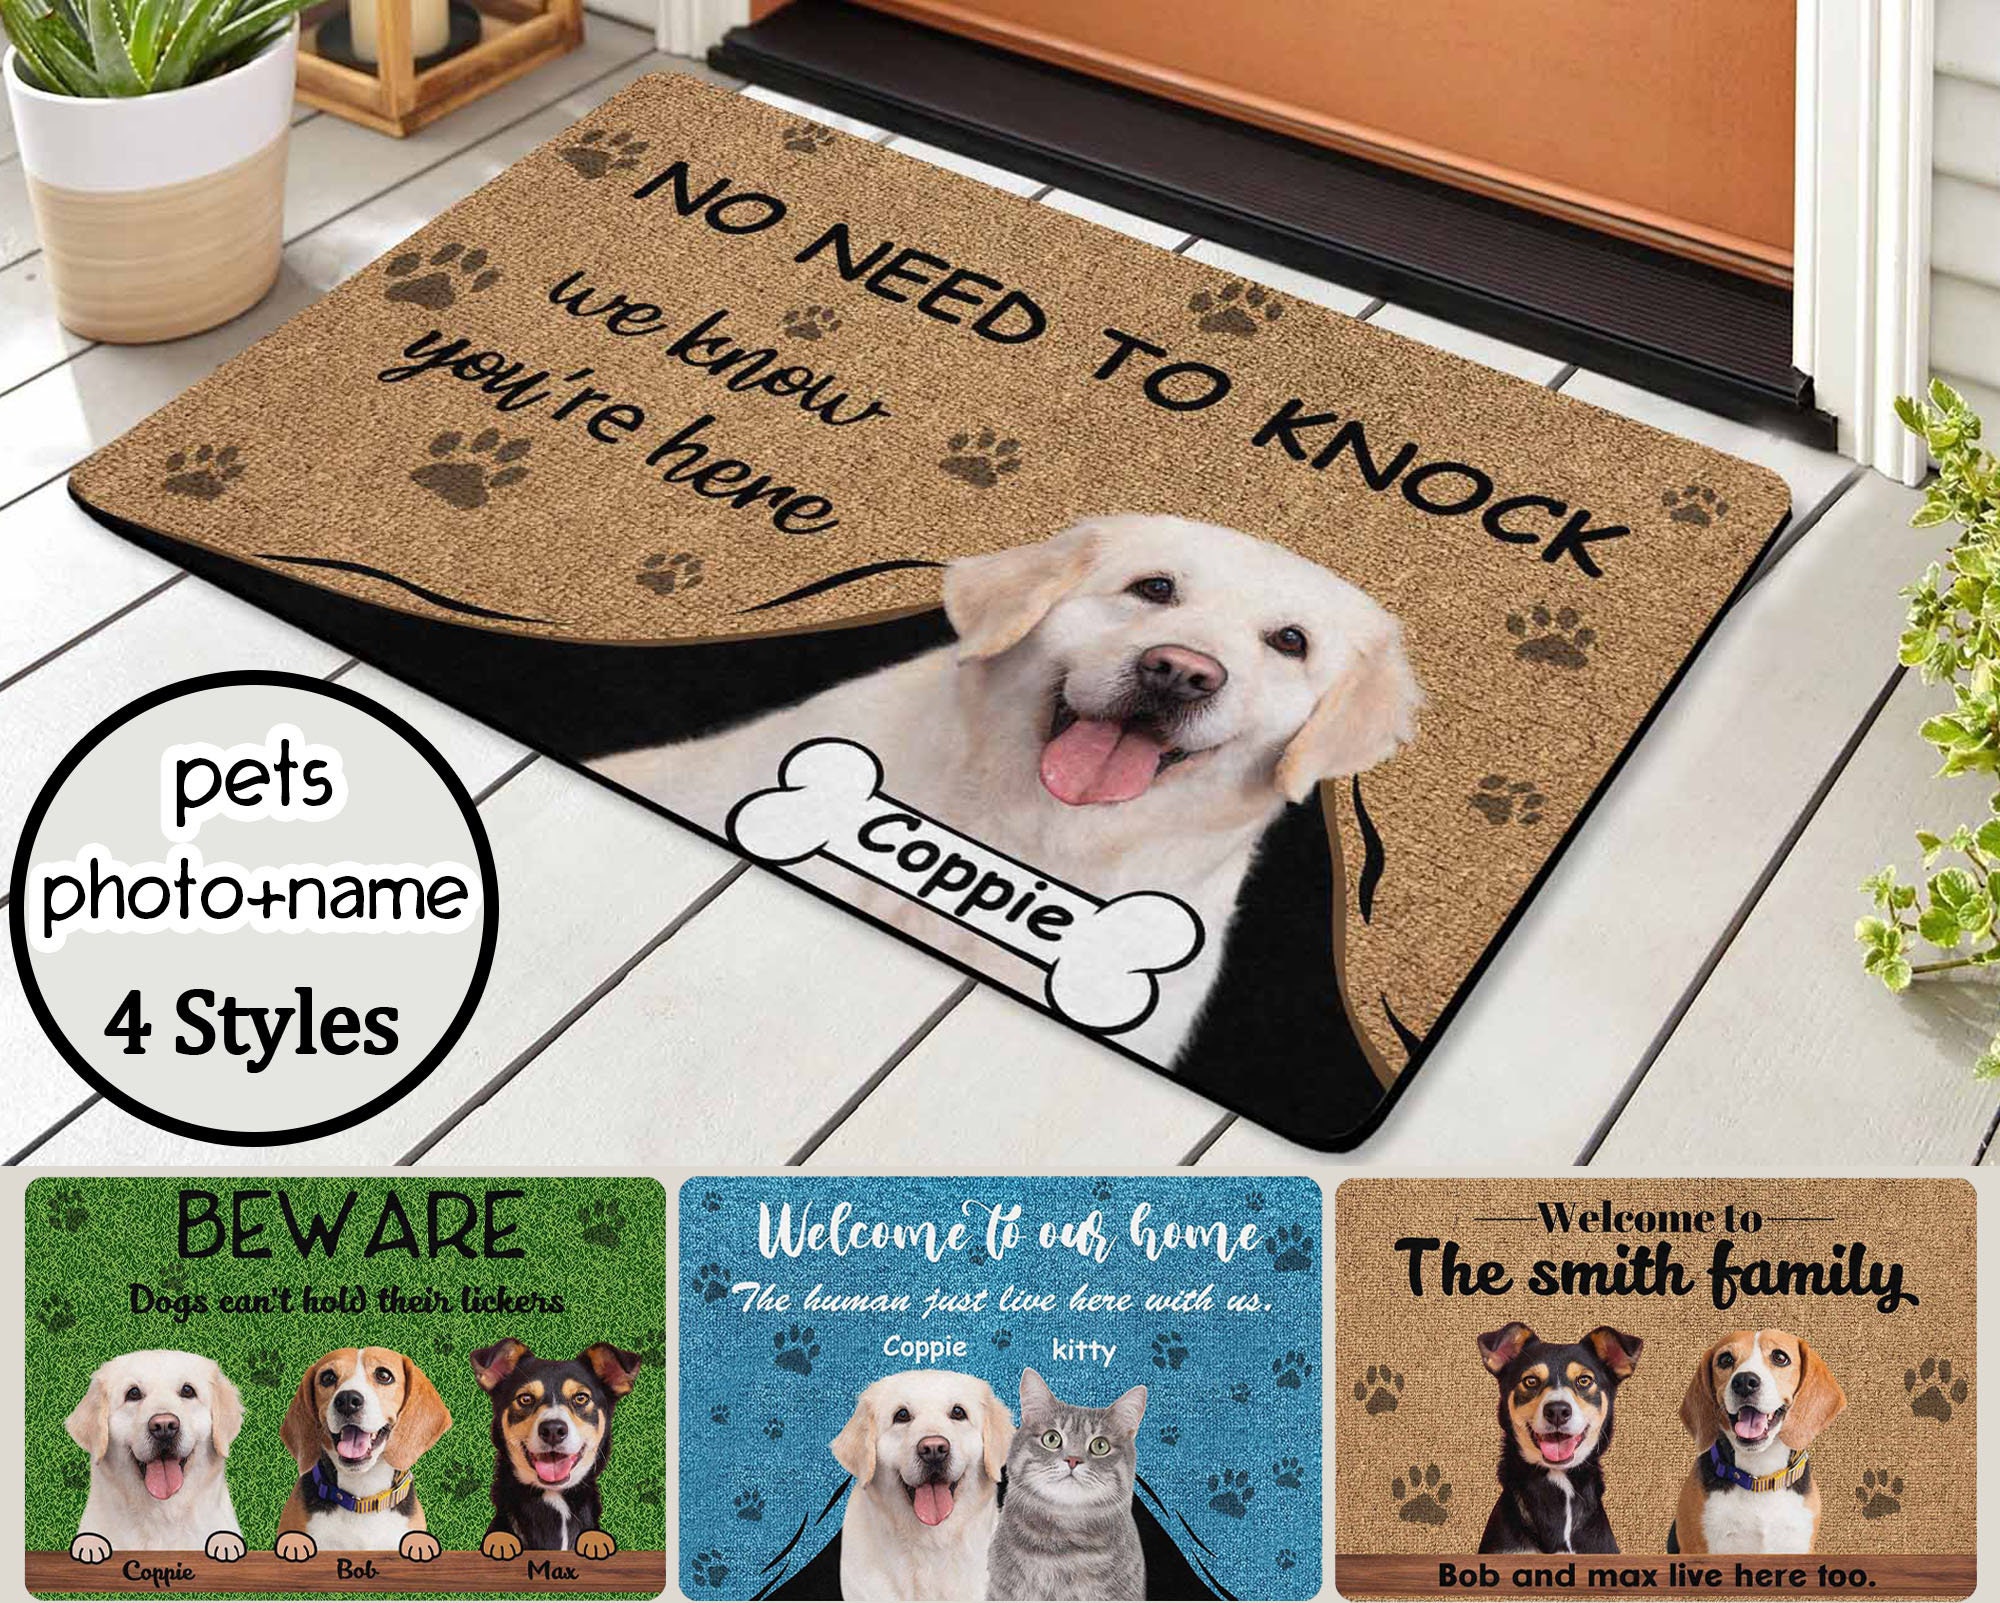 No Need To Knock We Know You Are Here Dog Doormat Personalized Dog Mud Mat,  Dog Doormat For Muddy Paws